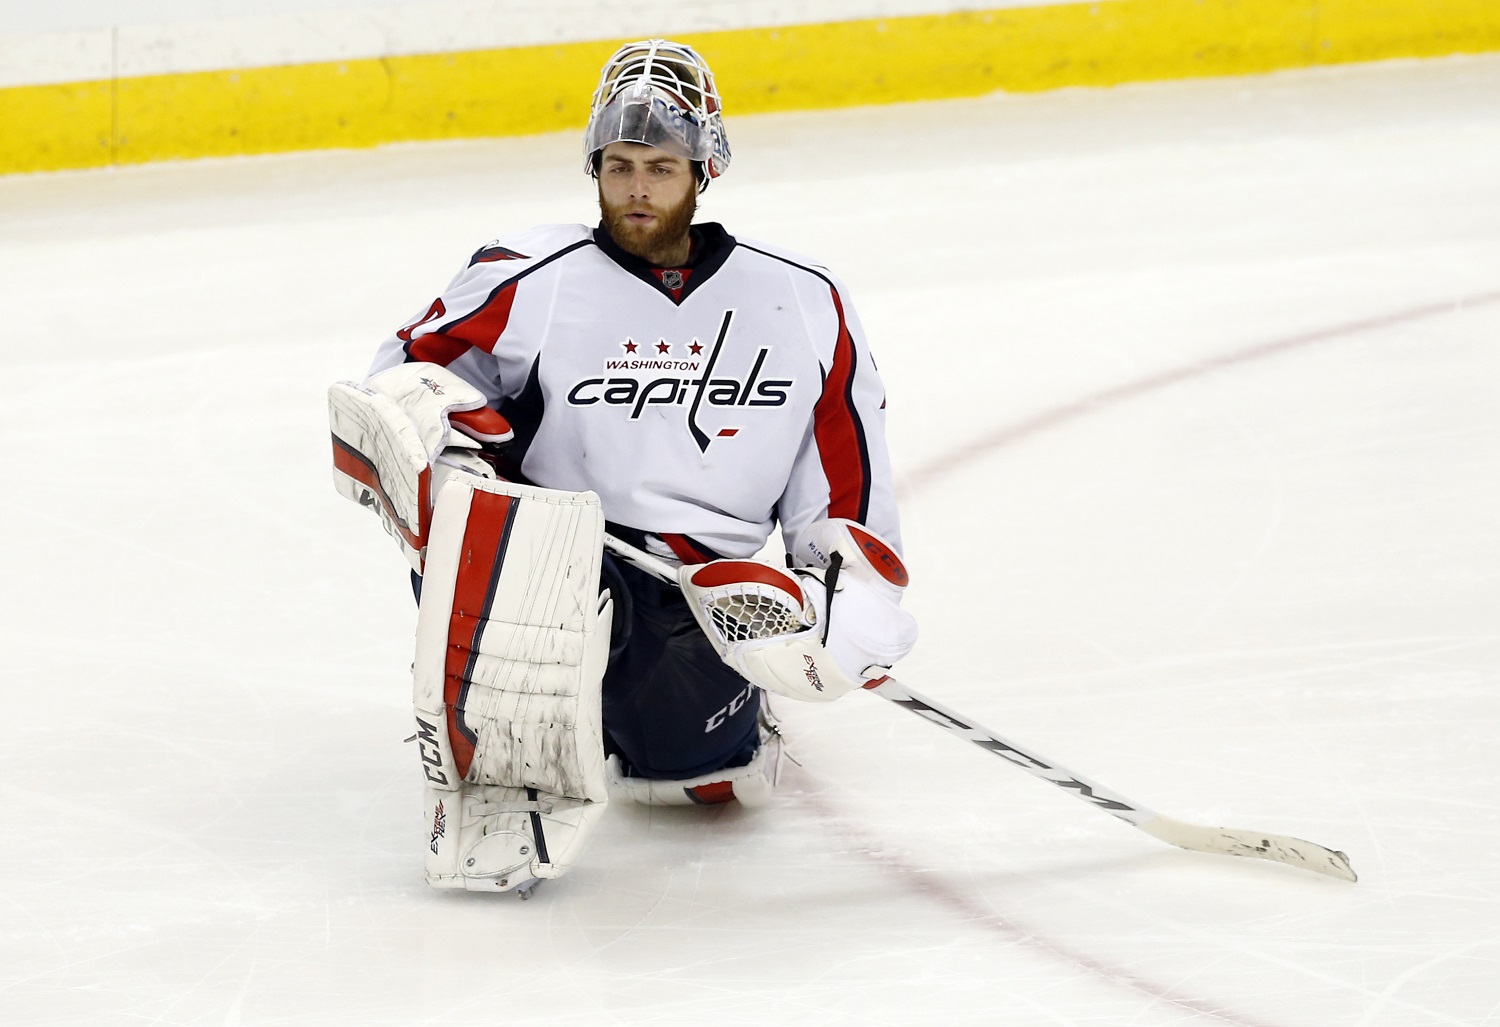 Washington Capitals goalie Braden Holtby plays against the Minnesota Wild in the first period of an NHL hockey game, Thursday, Feb. 11, 2016, in St. Paul, Minn. (AP Photo/Jim Mone)